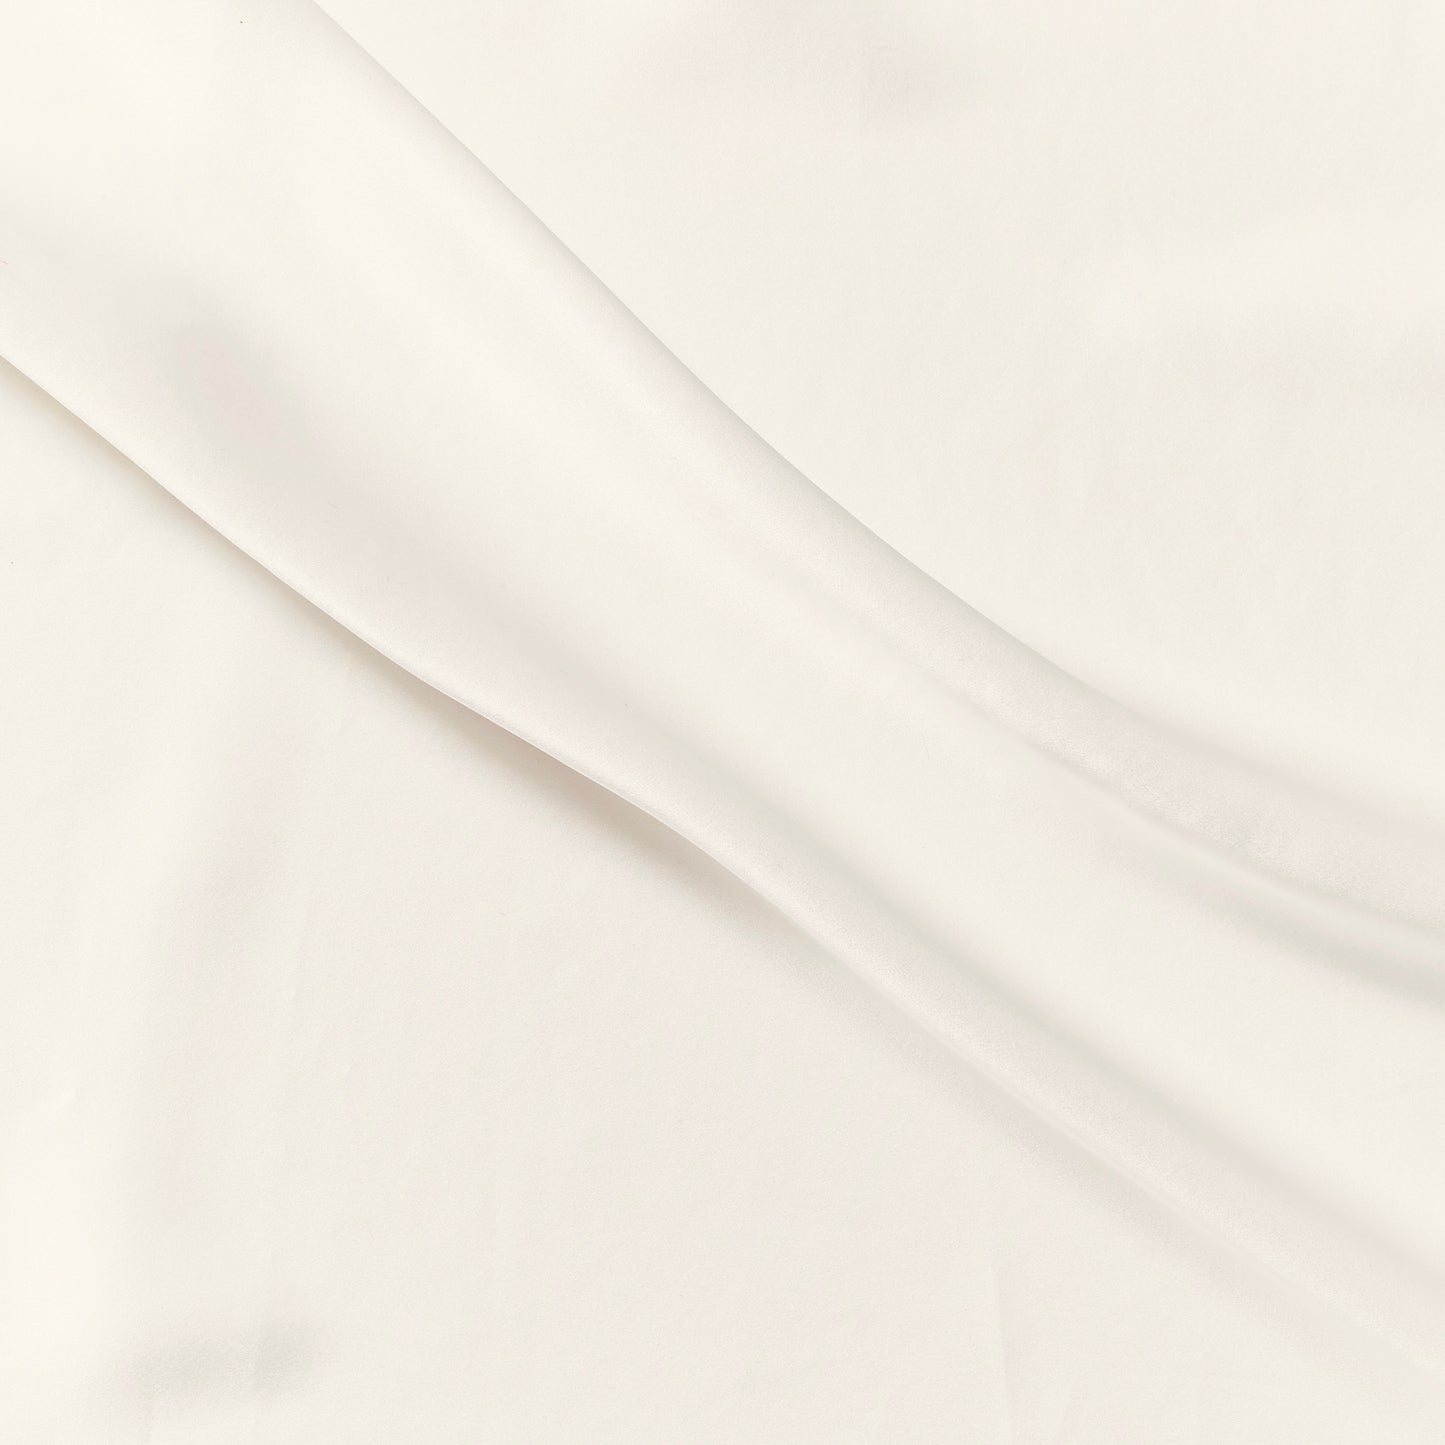 stretch silk satin featuring the natural color version of a silk and lycra blend with great drape